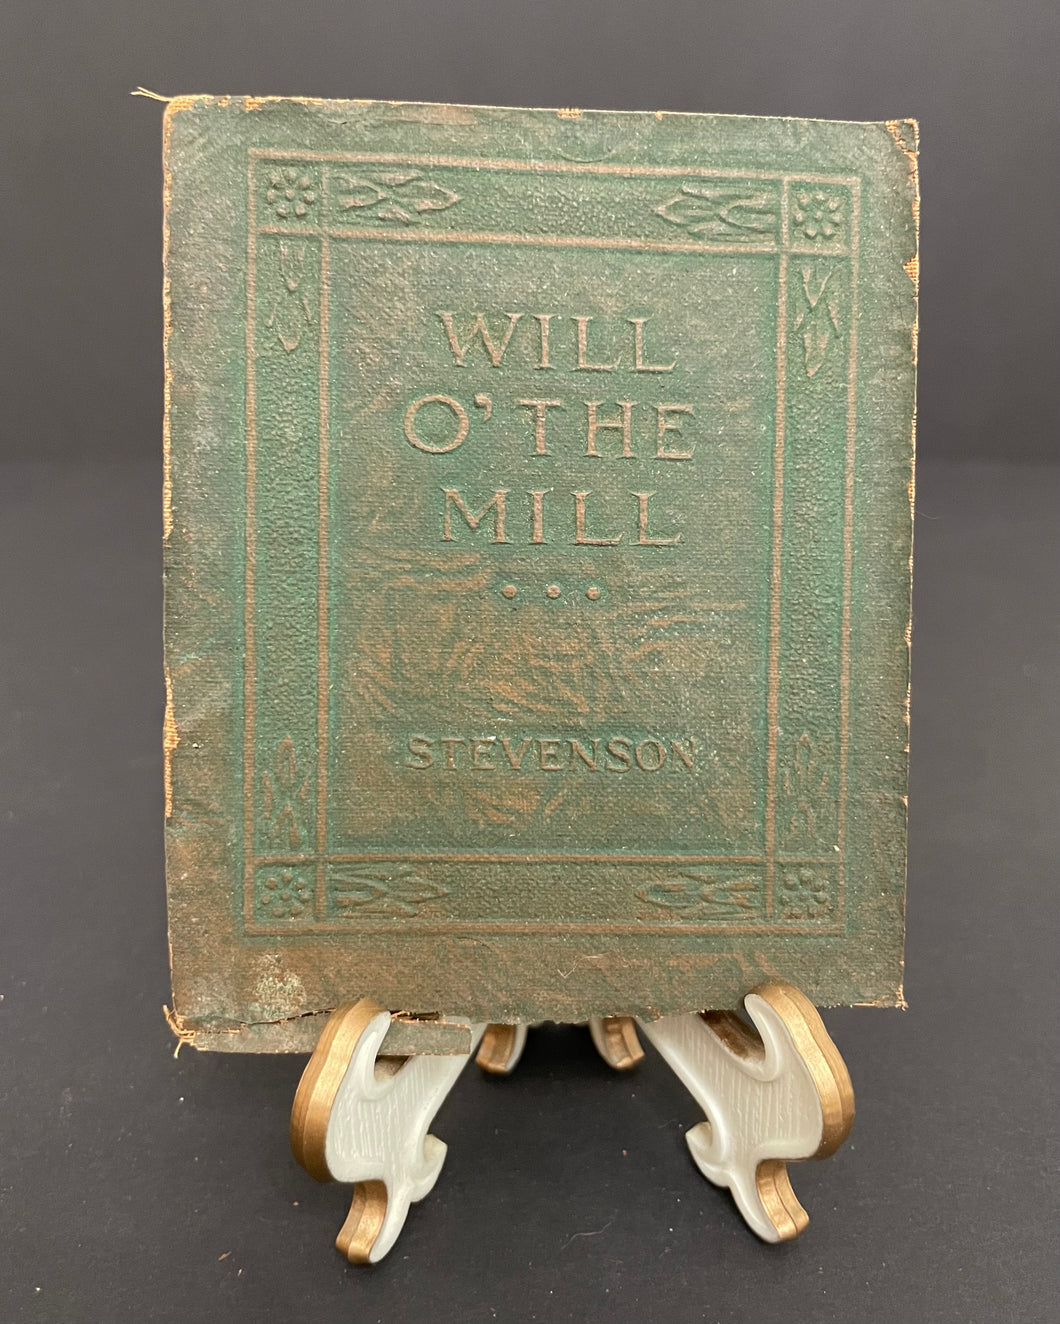 Antique Little Leather Library “Will O’ The Mill ” by Stevenson Book